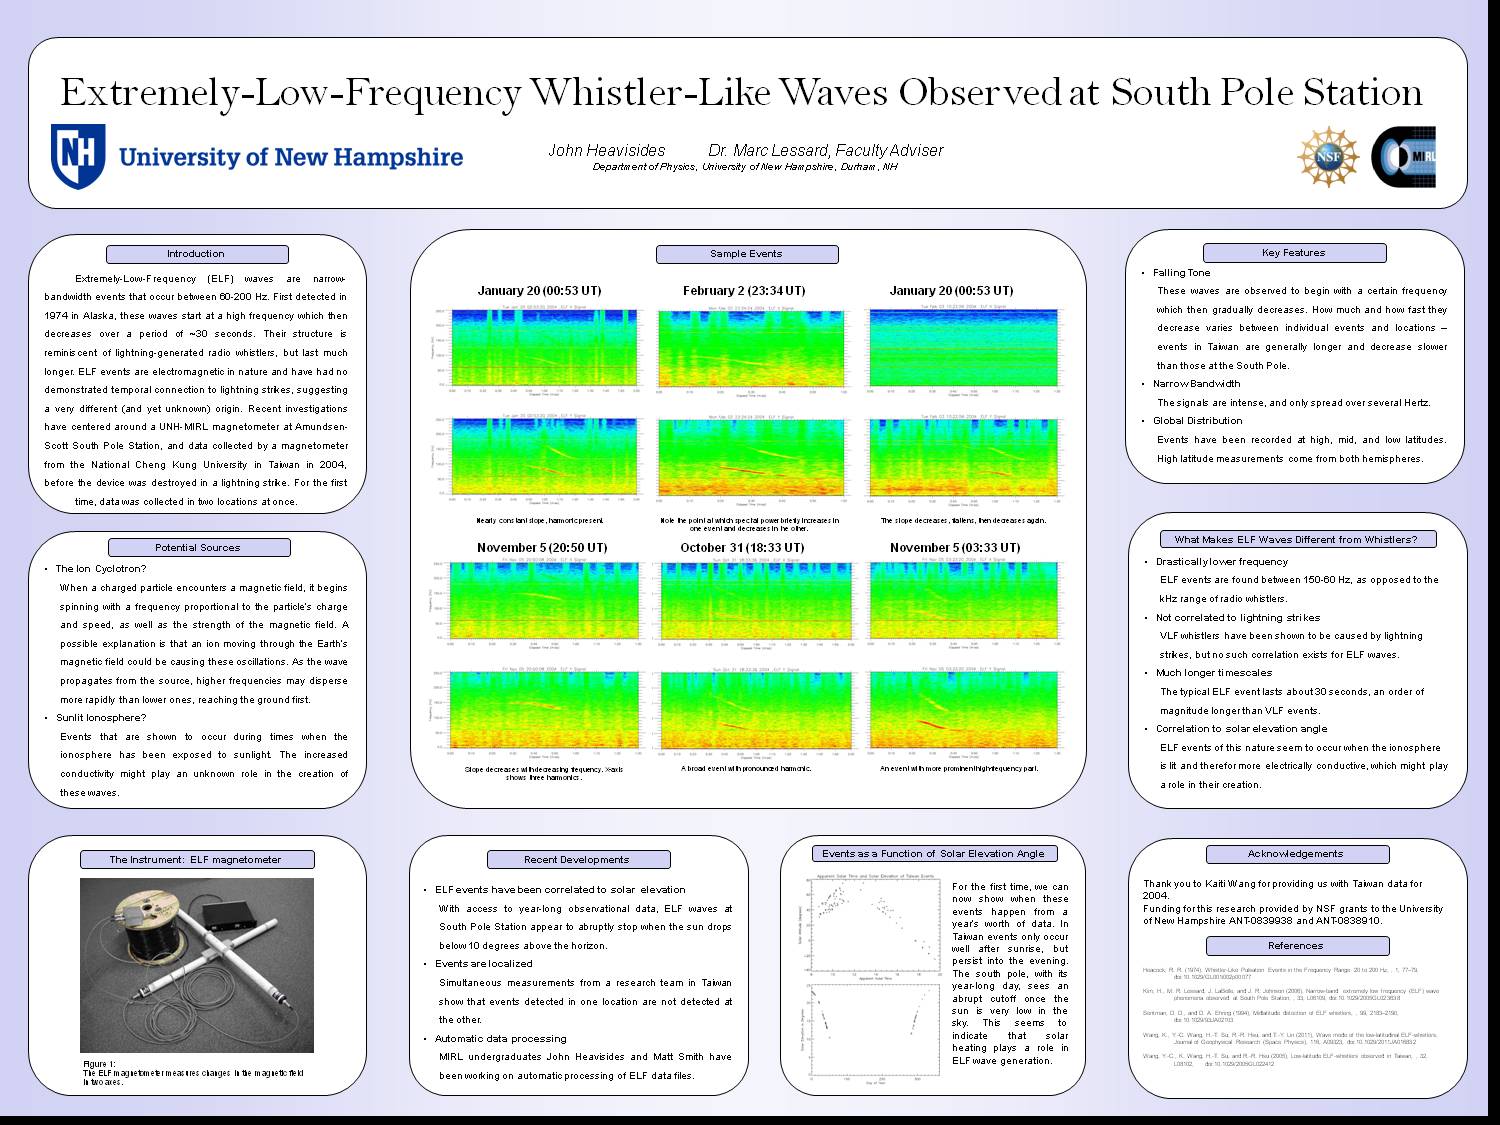 Our Singing Ionosphere:  Extremely-Low-Frequency Whistlers Observed At South Pole Station by jheavisides